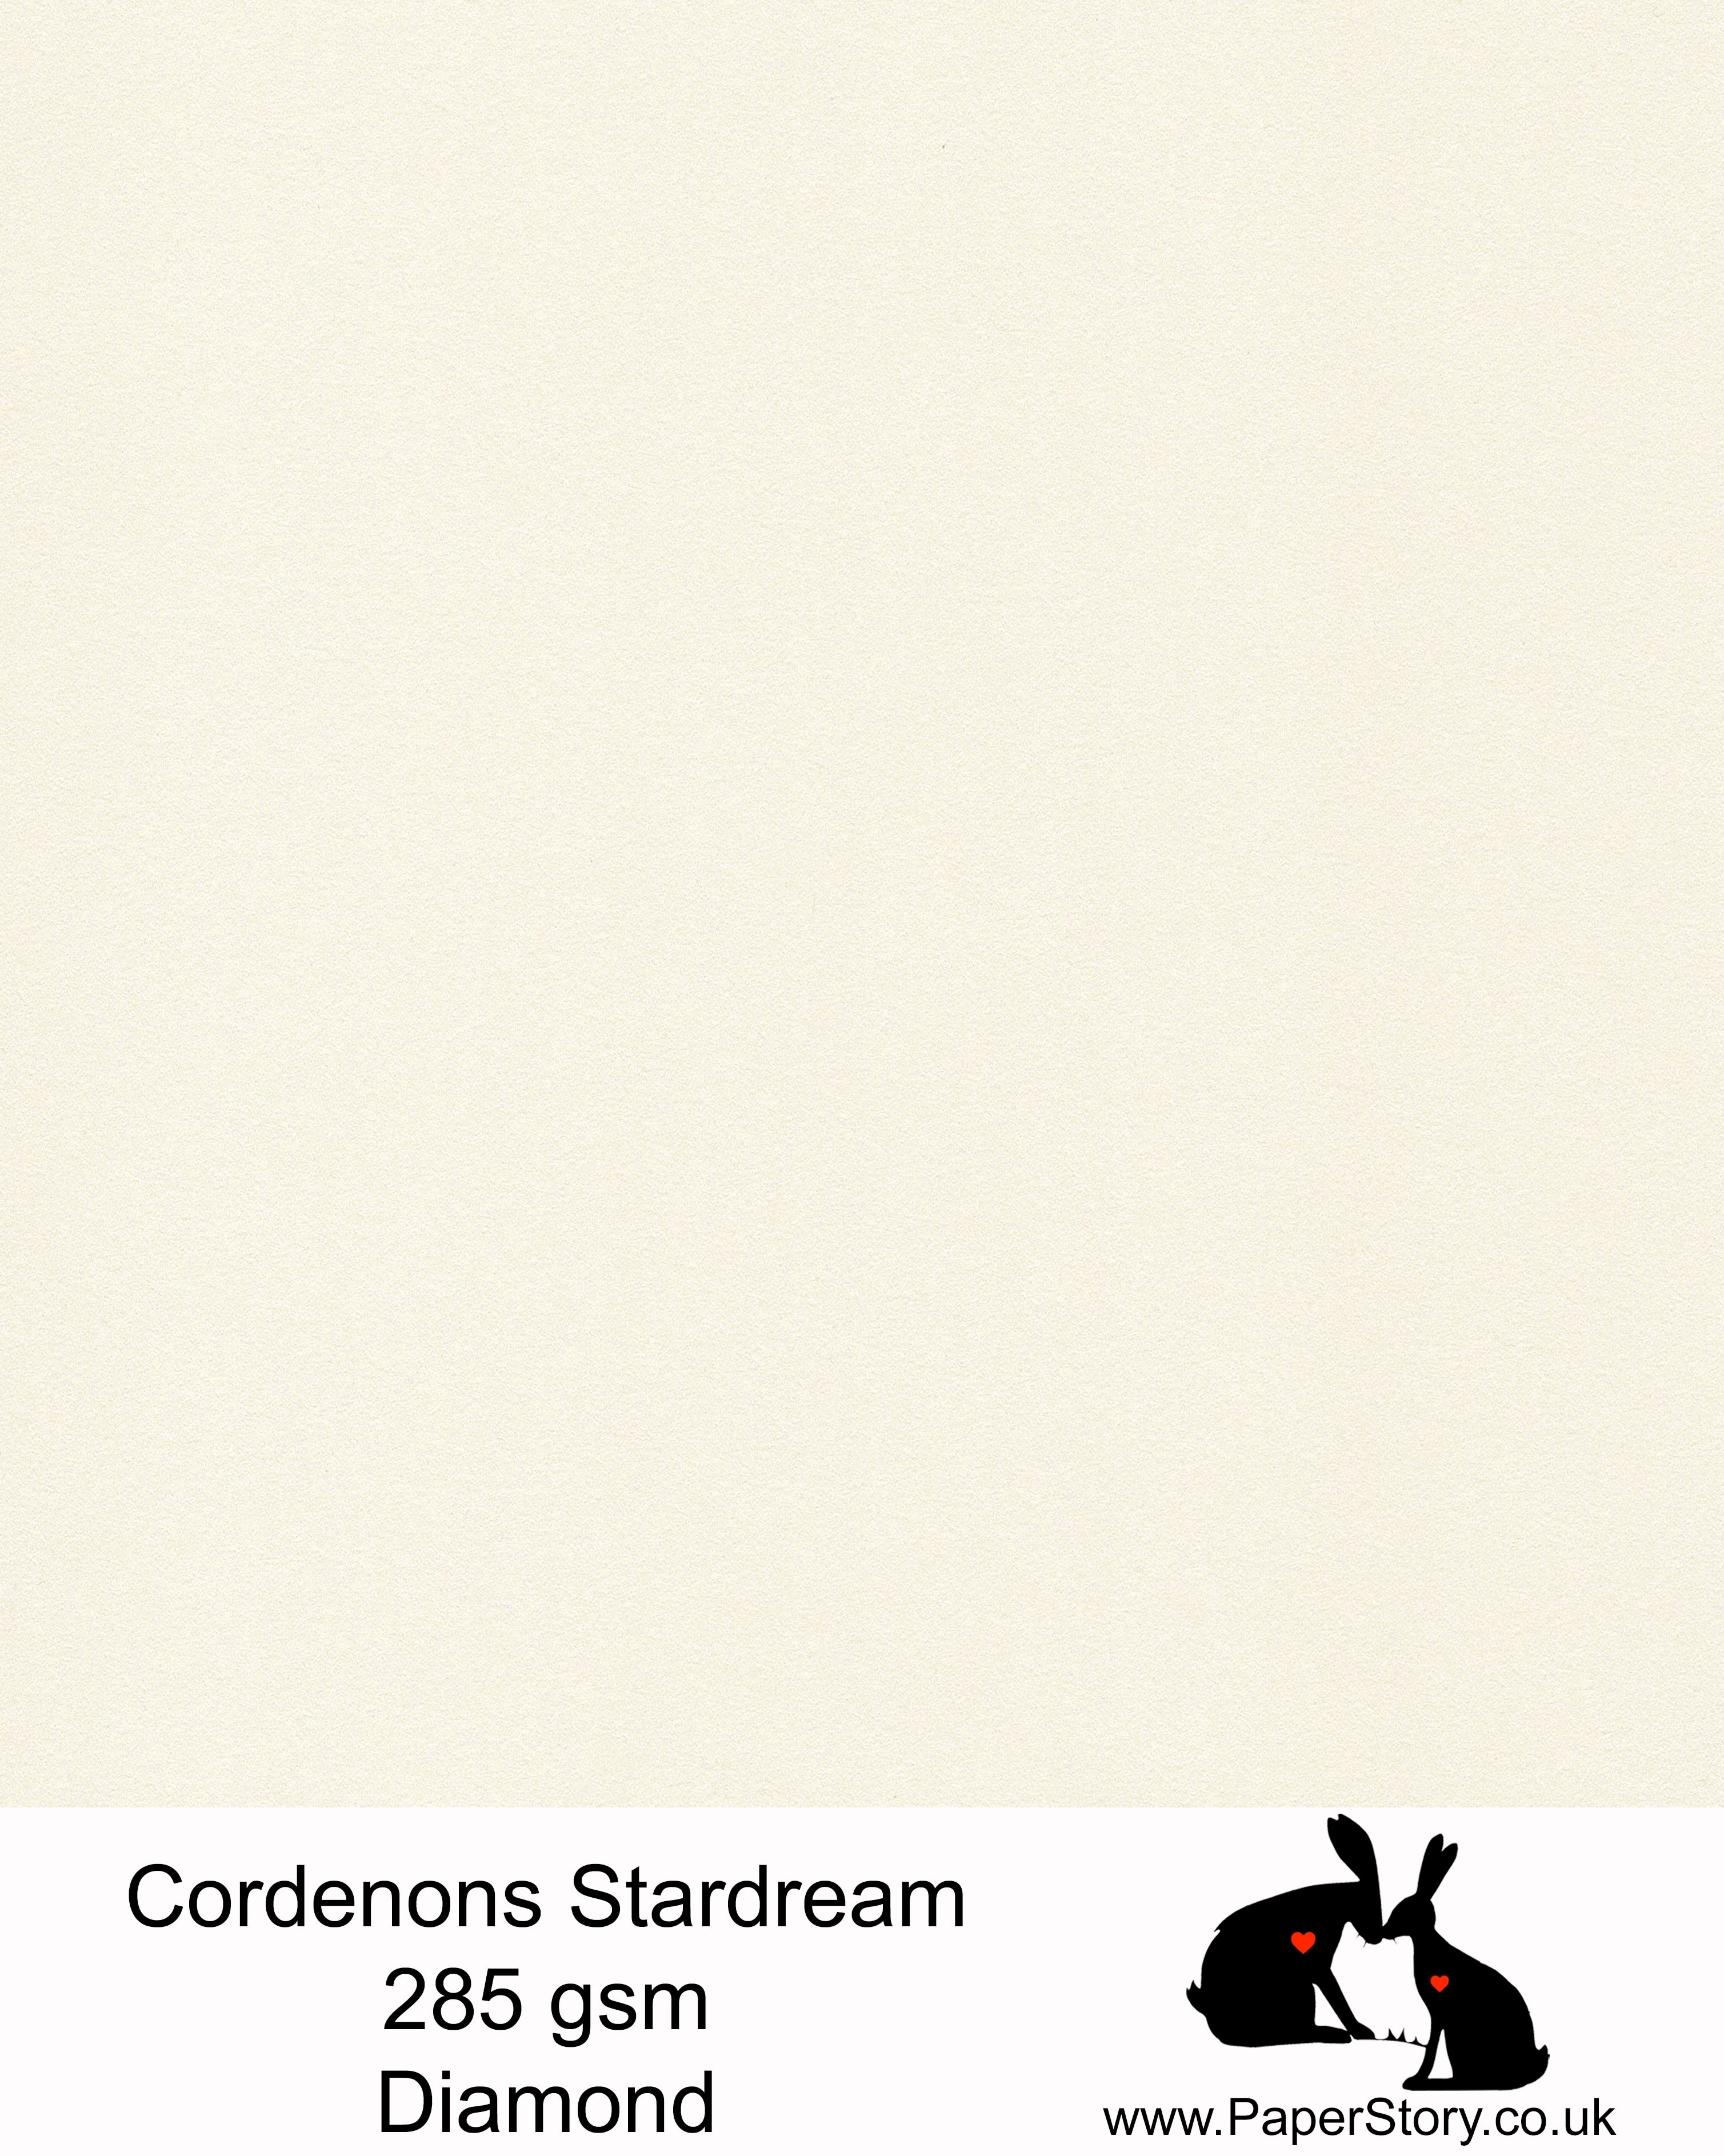 Stardream Diamond White, soft white with a hint of warmth, classic wedding Ivory colour, this card is a luxury premium branded Italian pearlescent card from Gruppo Cordenons, made in Italy. With a double sided quality pearlescent finish and a colour core, makes this perfect for card making, wedding invitations and stationery. FSC certified, acid free, archival and PH neutral 